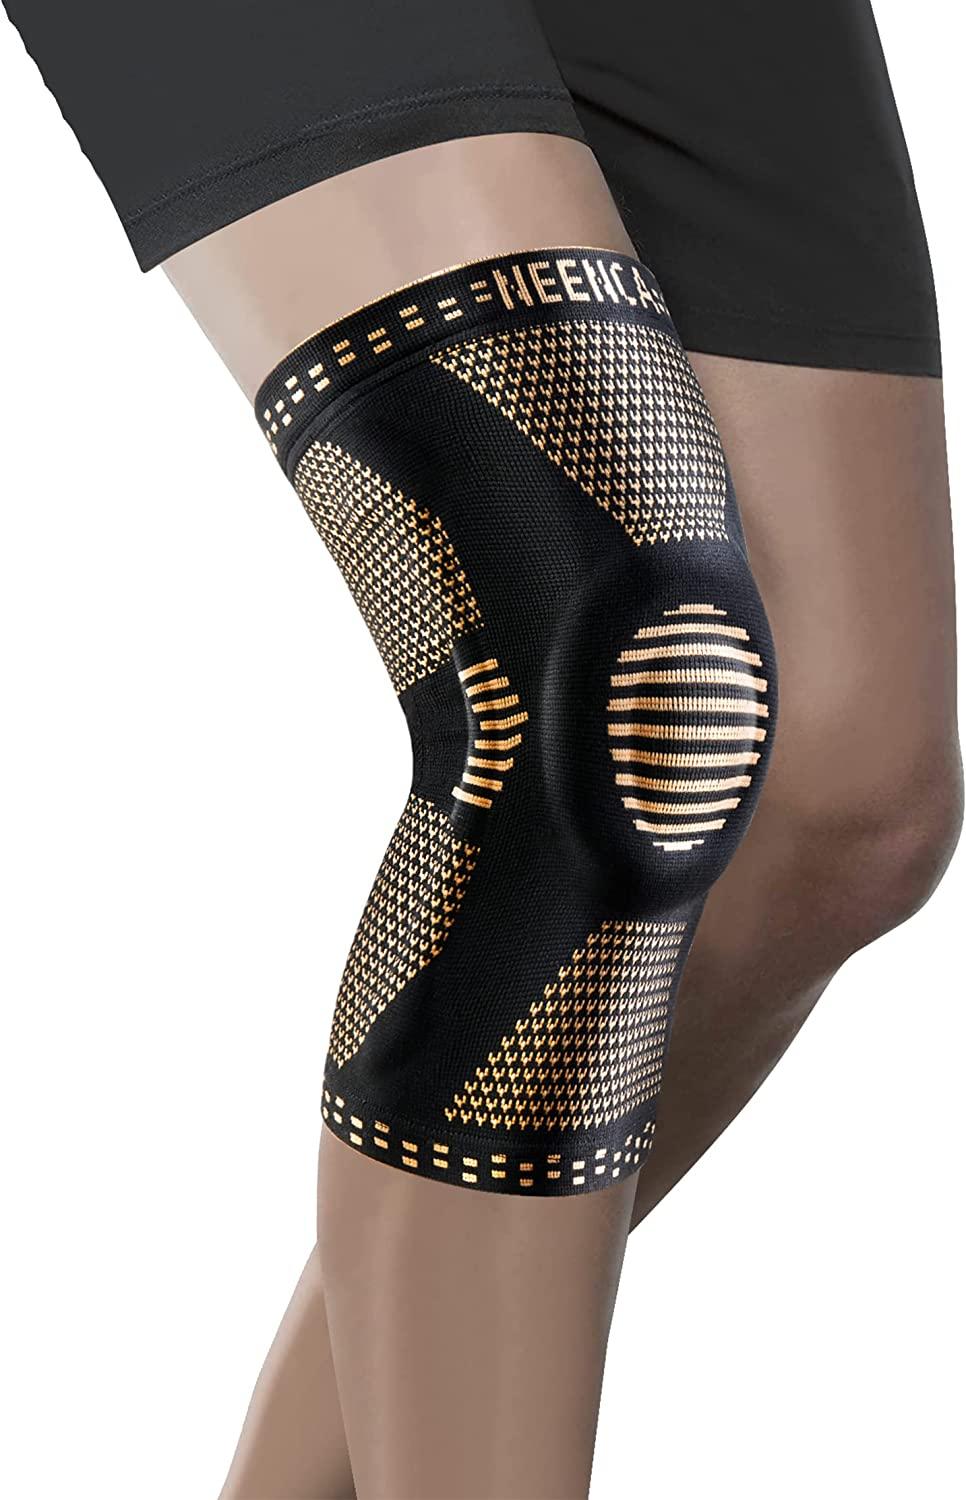 2x Knee Sleeves Copper Silver Compression Brace Support Sport Joint Injury  Gel - La Paz County Sheriff's Office Dedicated to Service